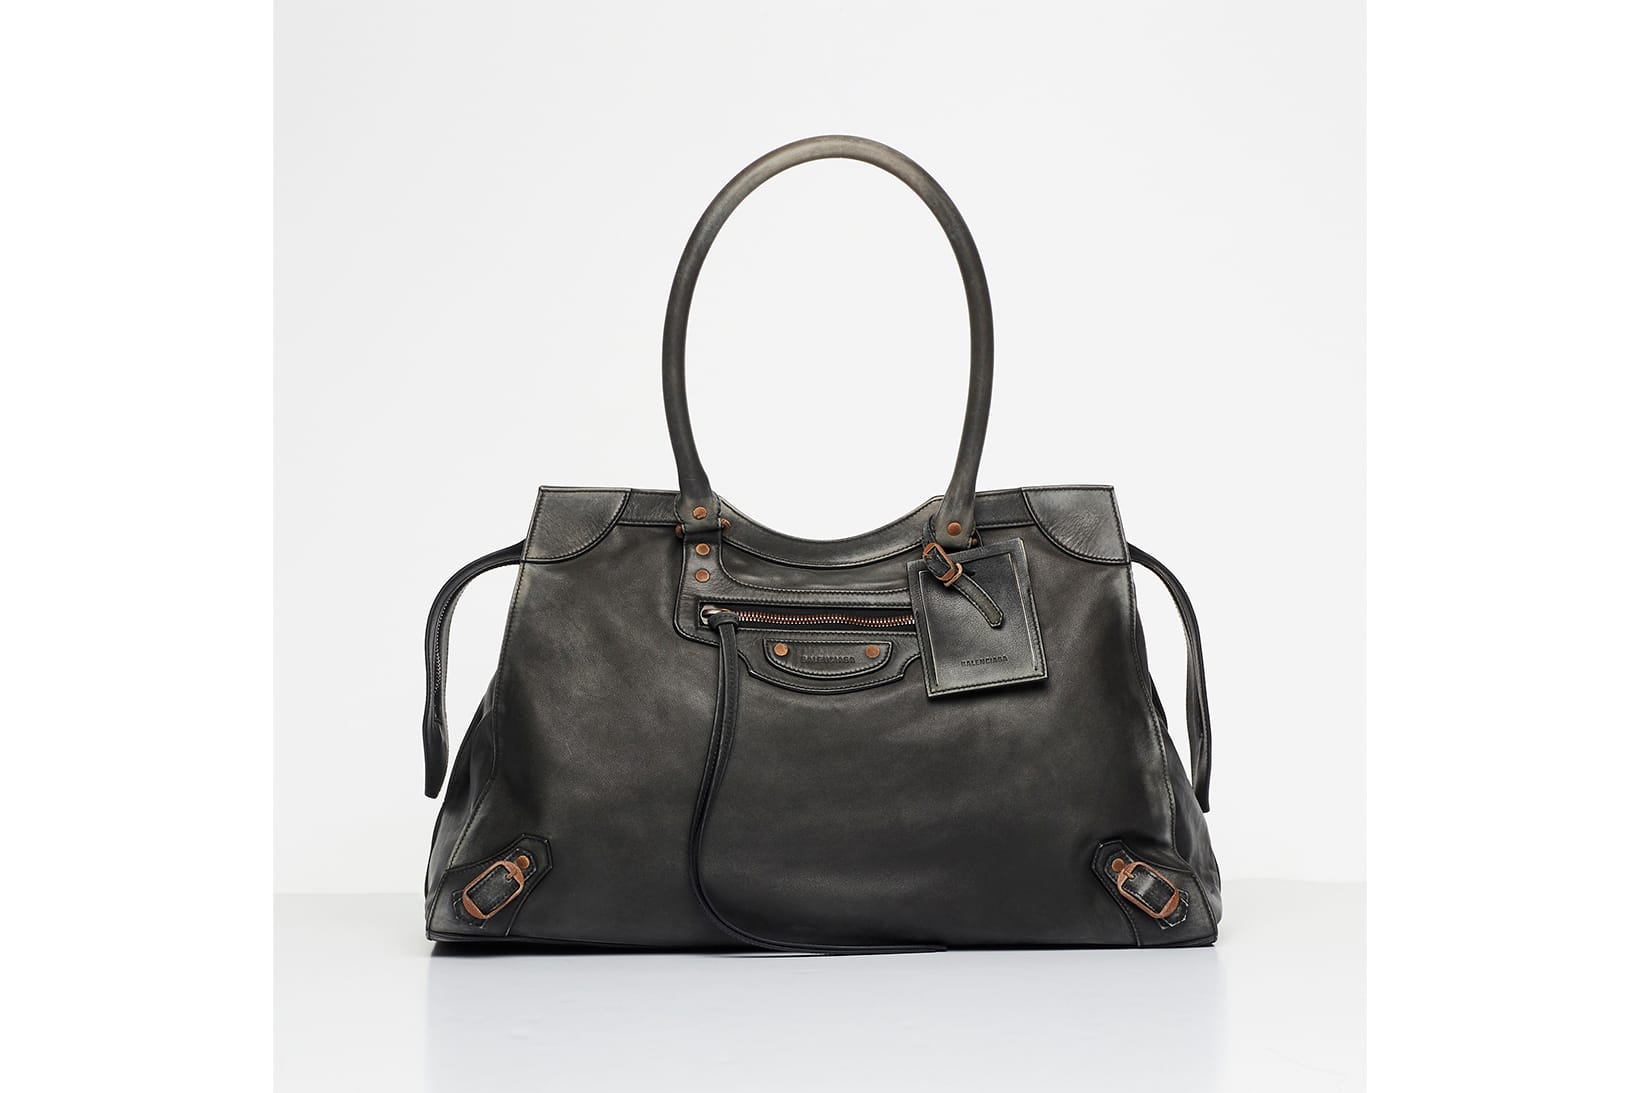 Balenciaga Launches New Bag, the Neo Classic Used | IicfShops